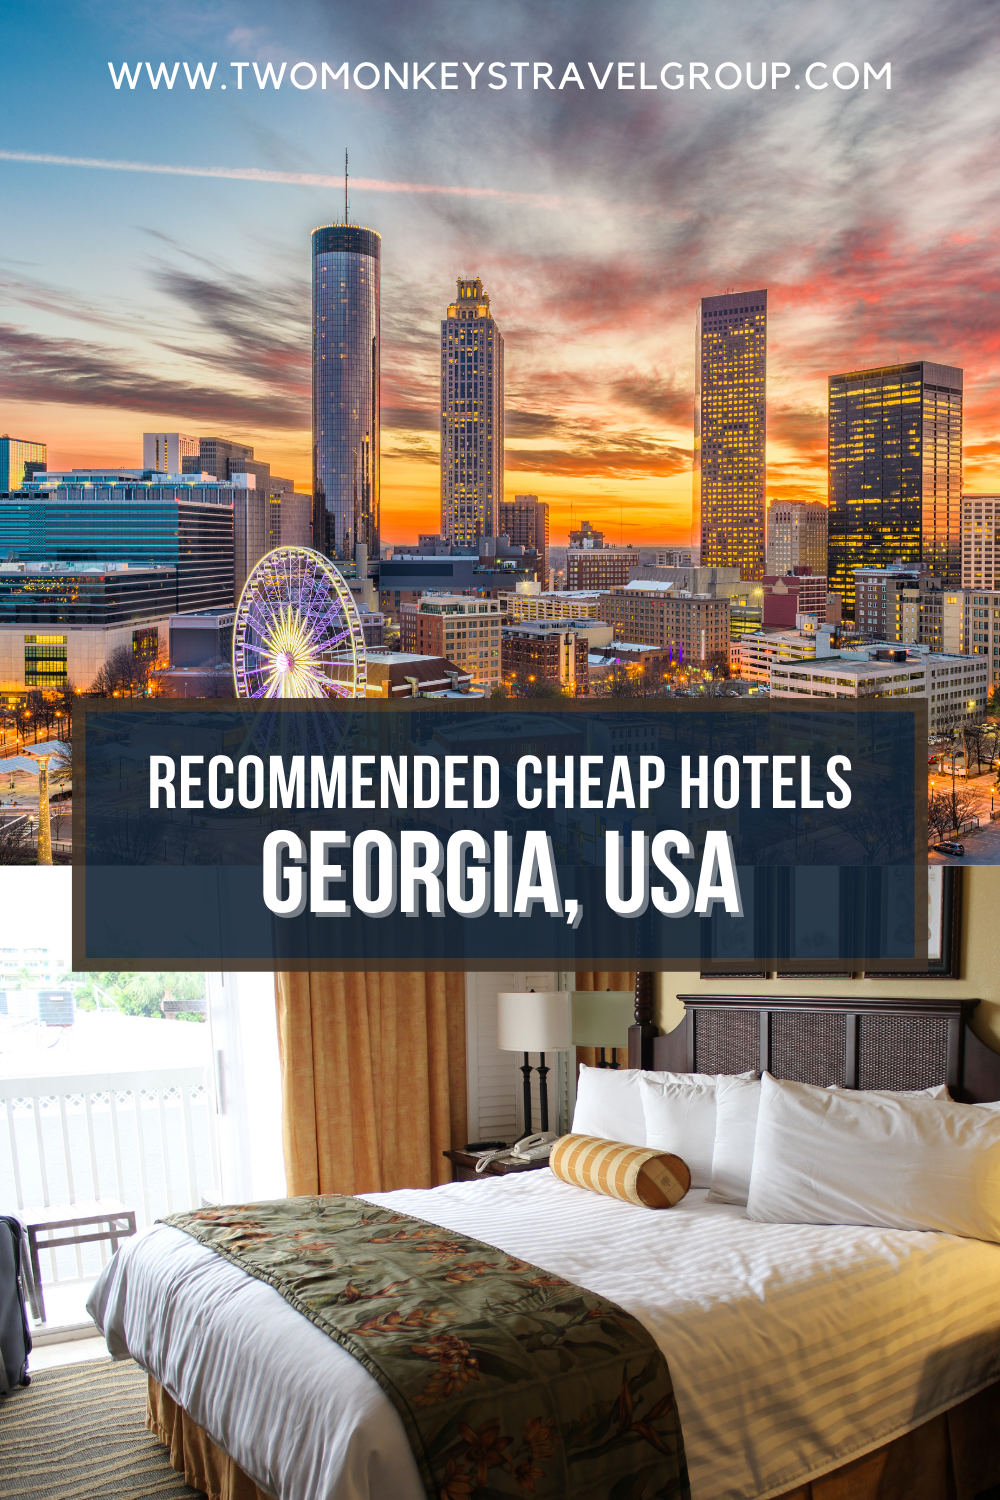 Complete List of Recommended Cheap Hotels in Georgia, USA